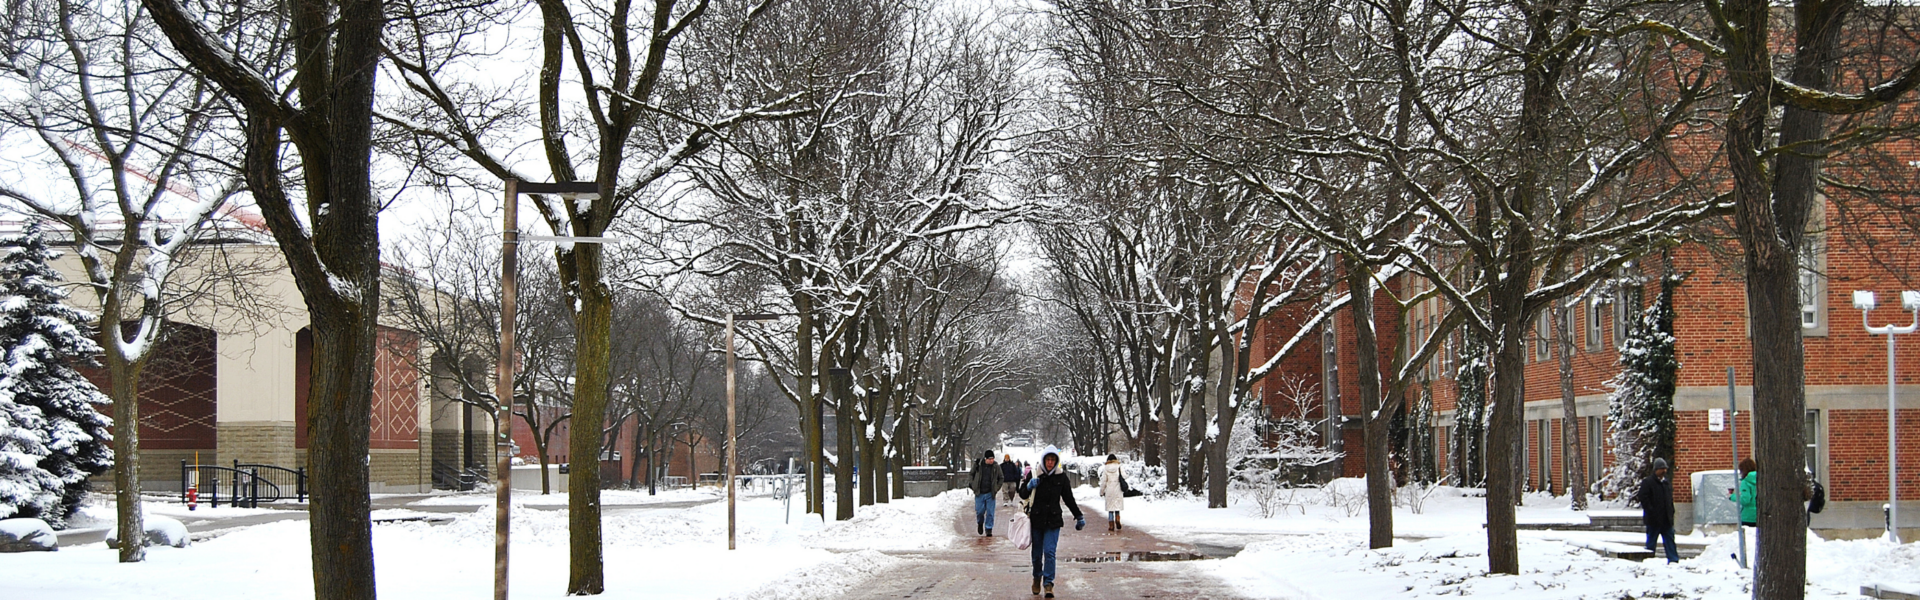 The tree-lined Alumni Walk on the University of Guelph campus on a snowy day.